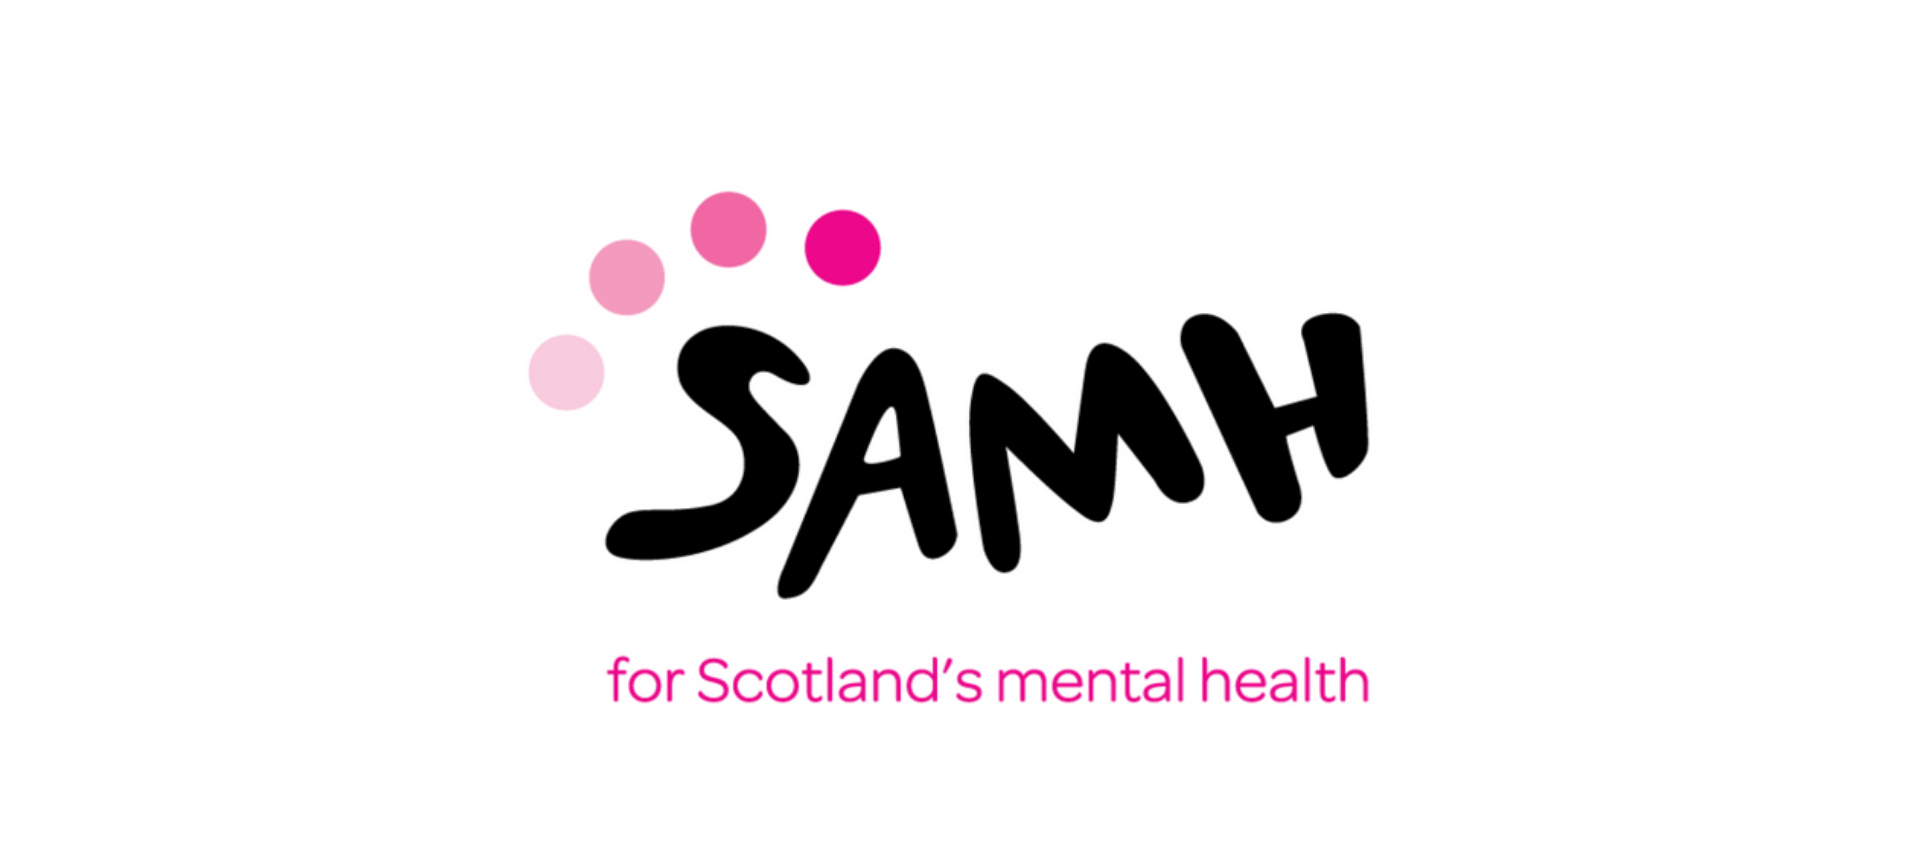 Additional mental health training opportunities